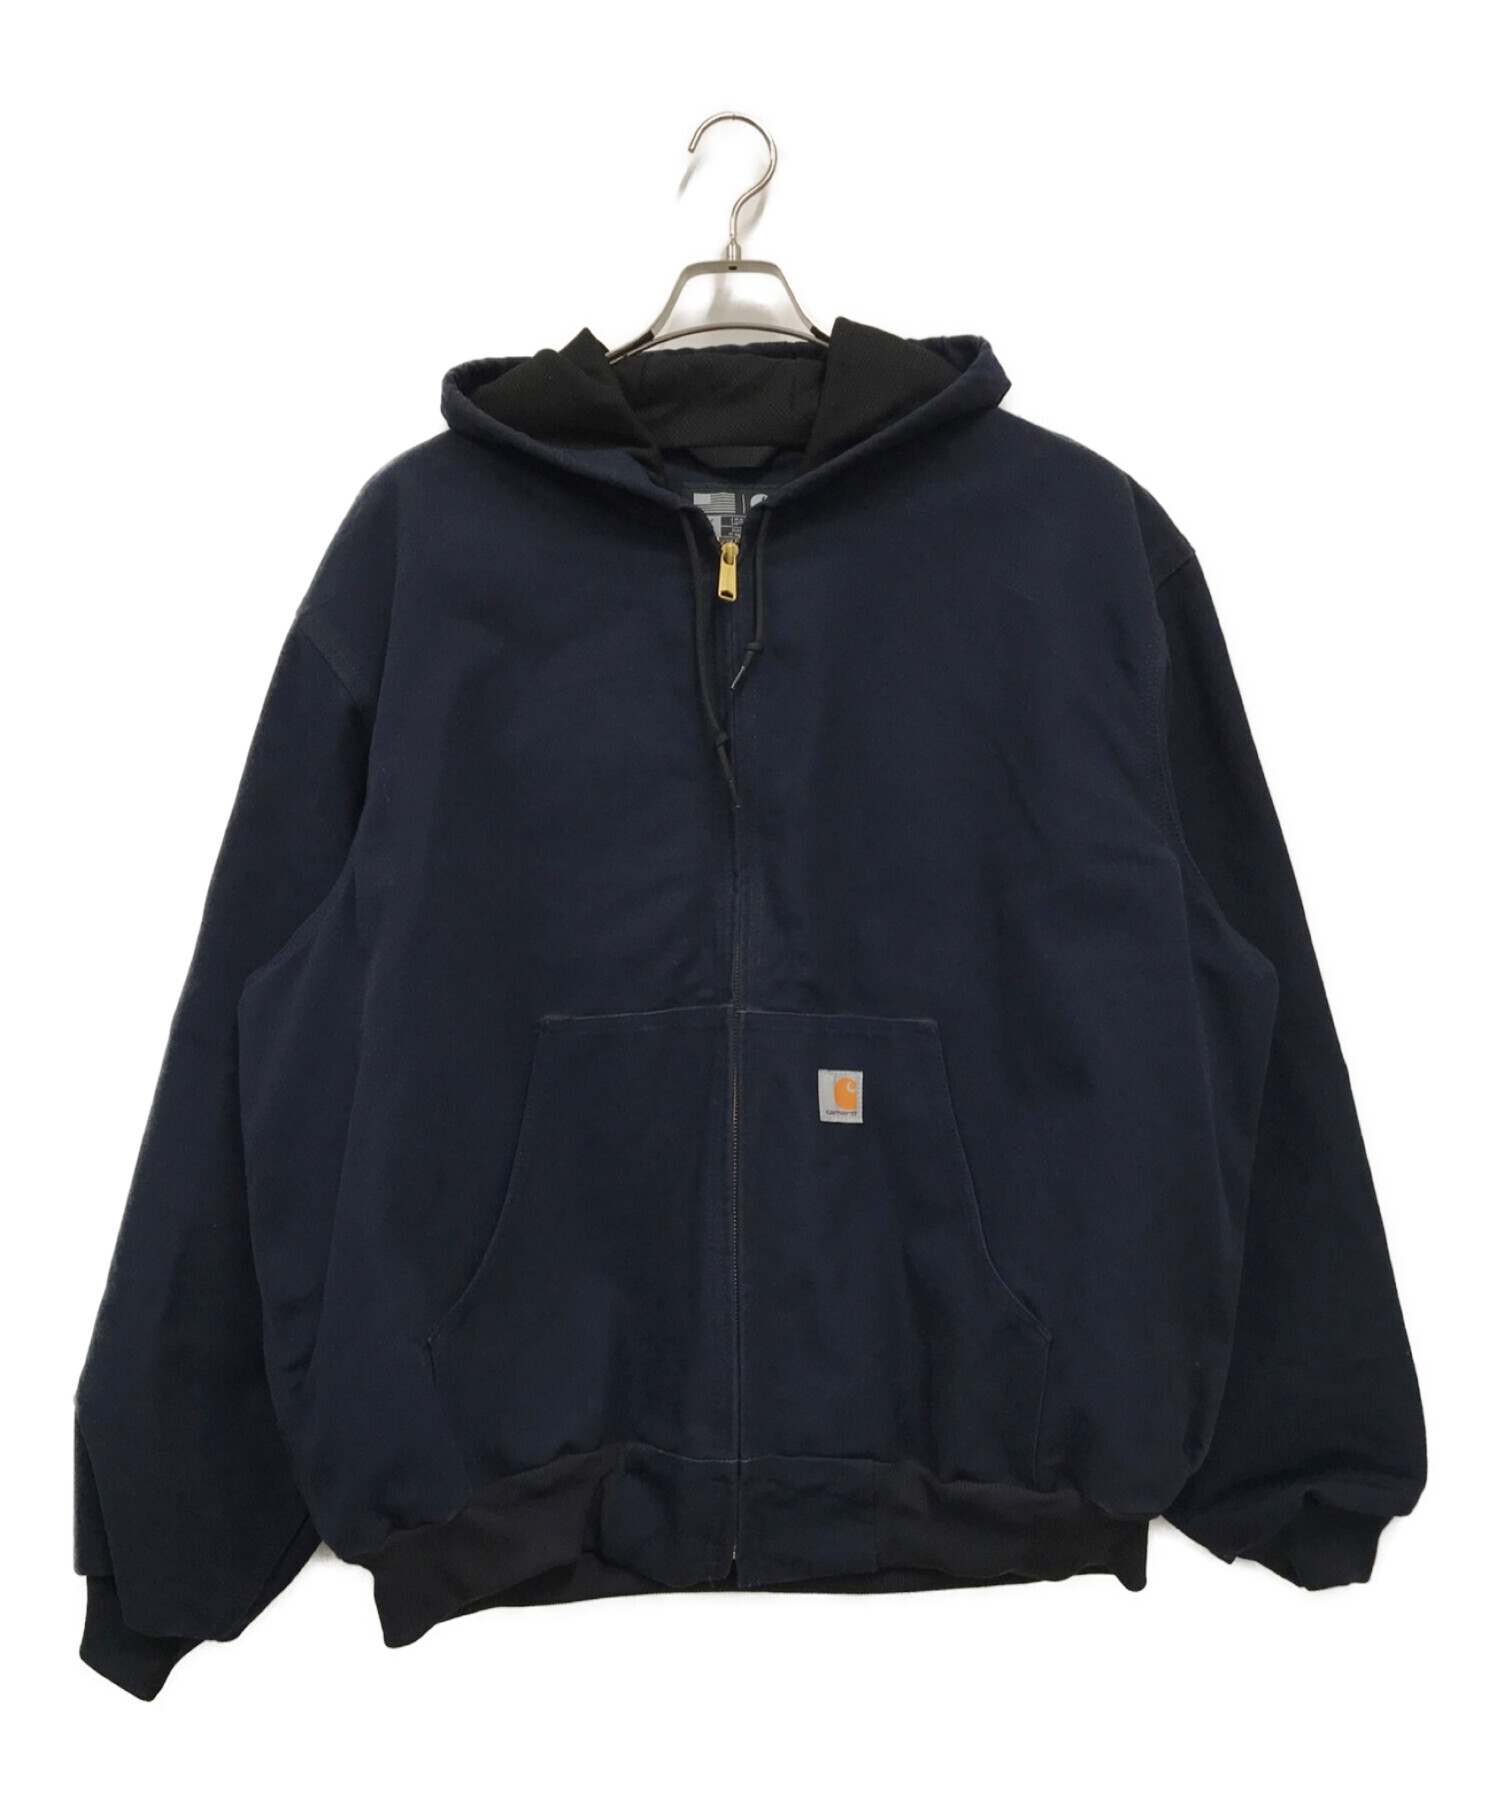 carhartt active jacket アクティブジャケット | camillevieraservices.com